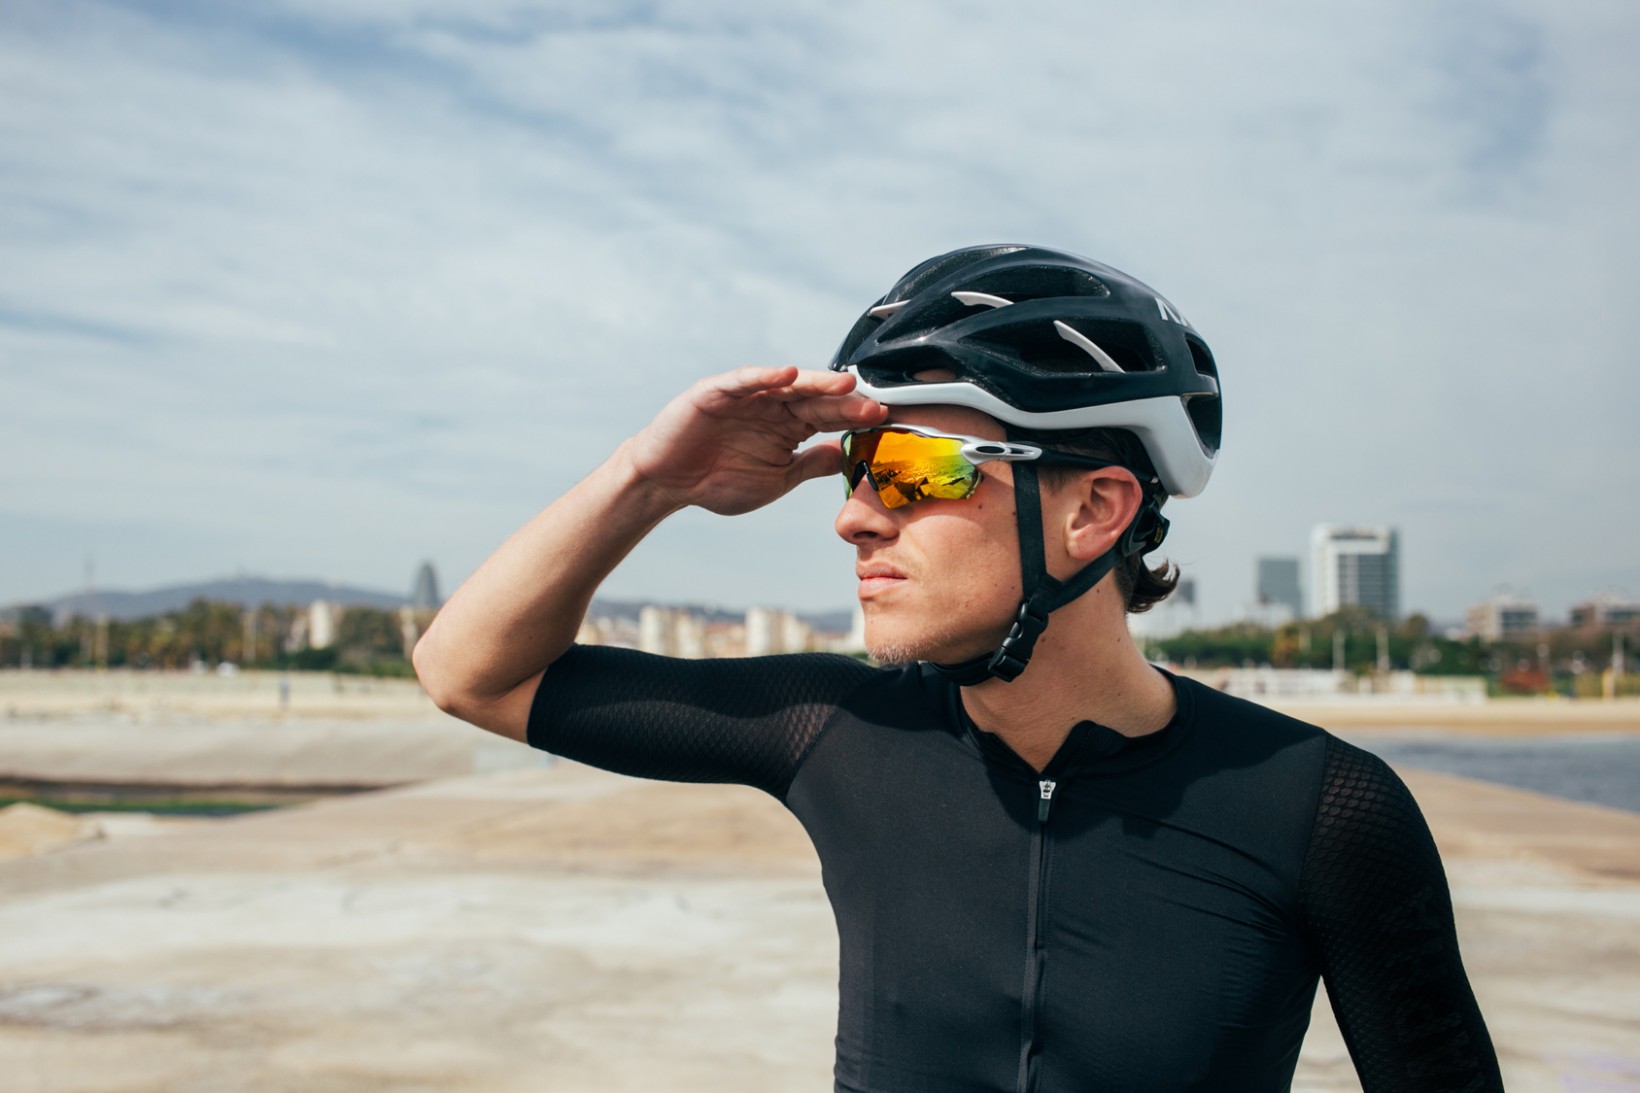 Professional cyclist in all black looks into the distance wearing yellow lenses in glasses with city out of focus in the background